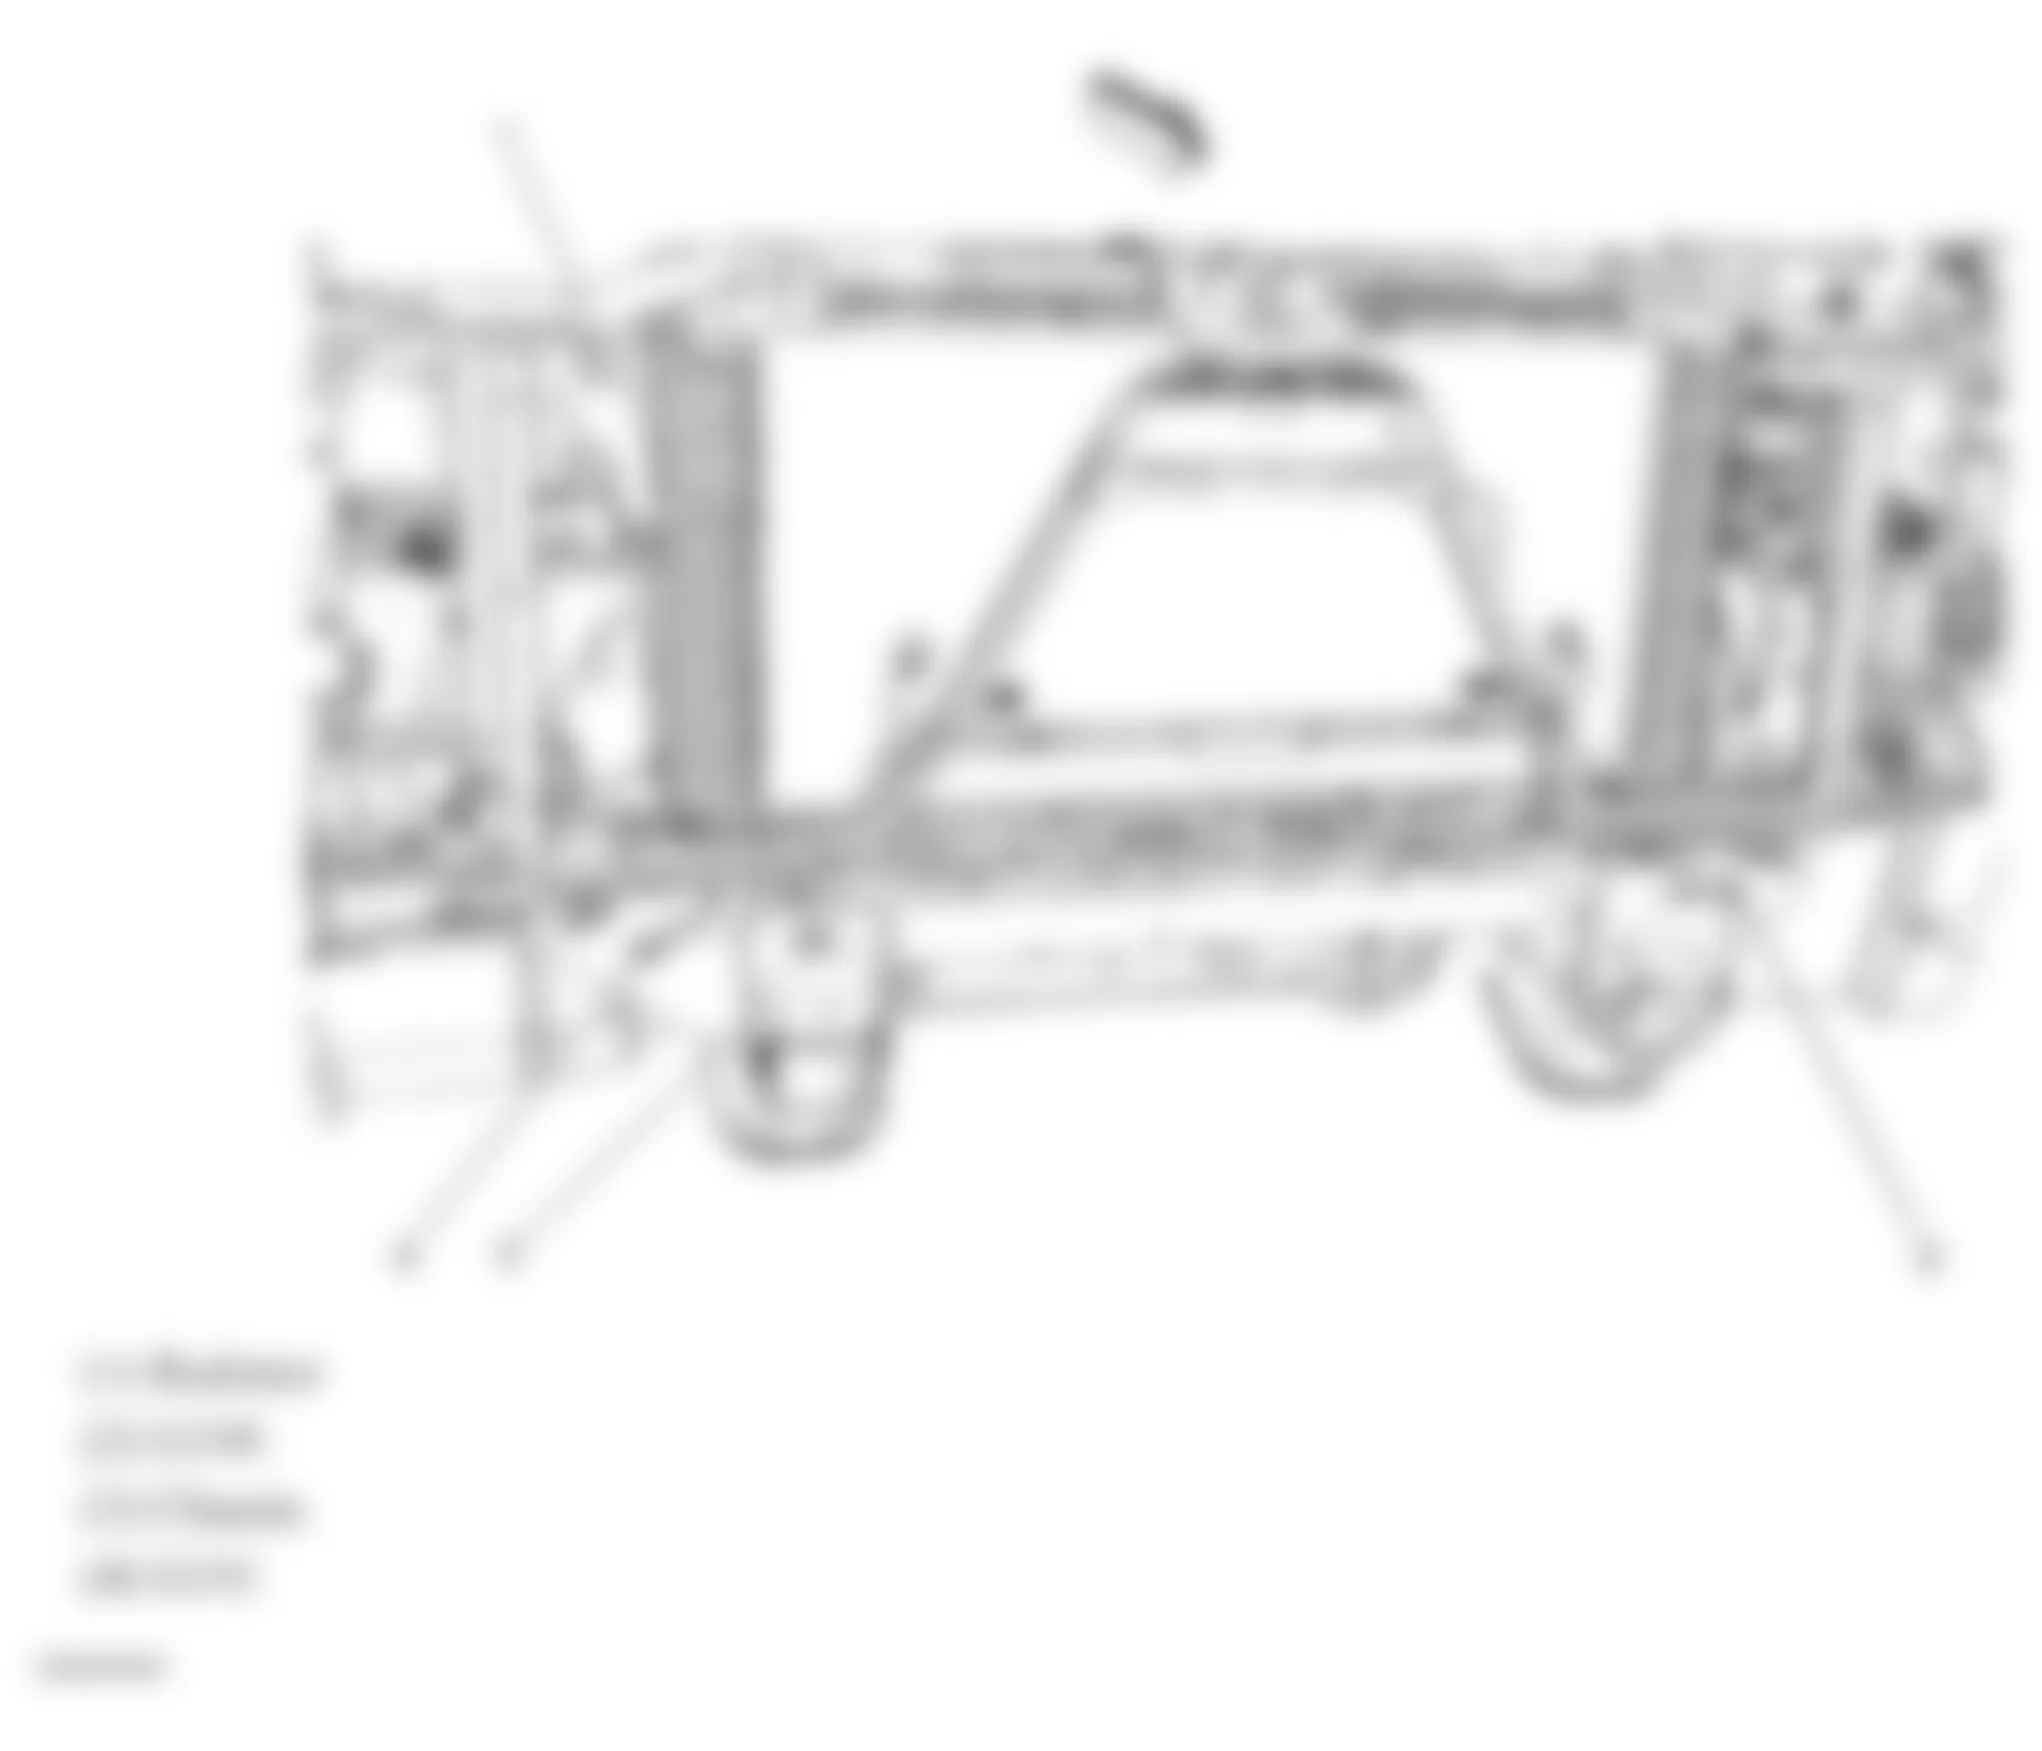 Chevrolet Silverado 1500 2007 - Component Locations -  Front Of Vehicle